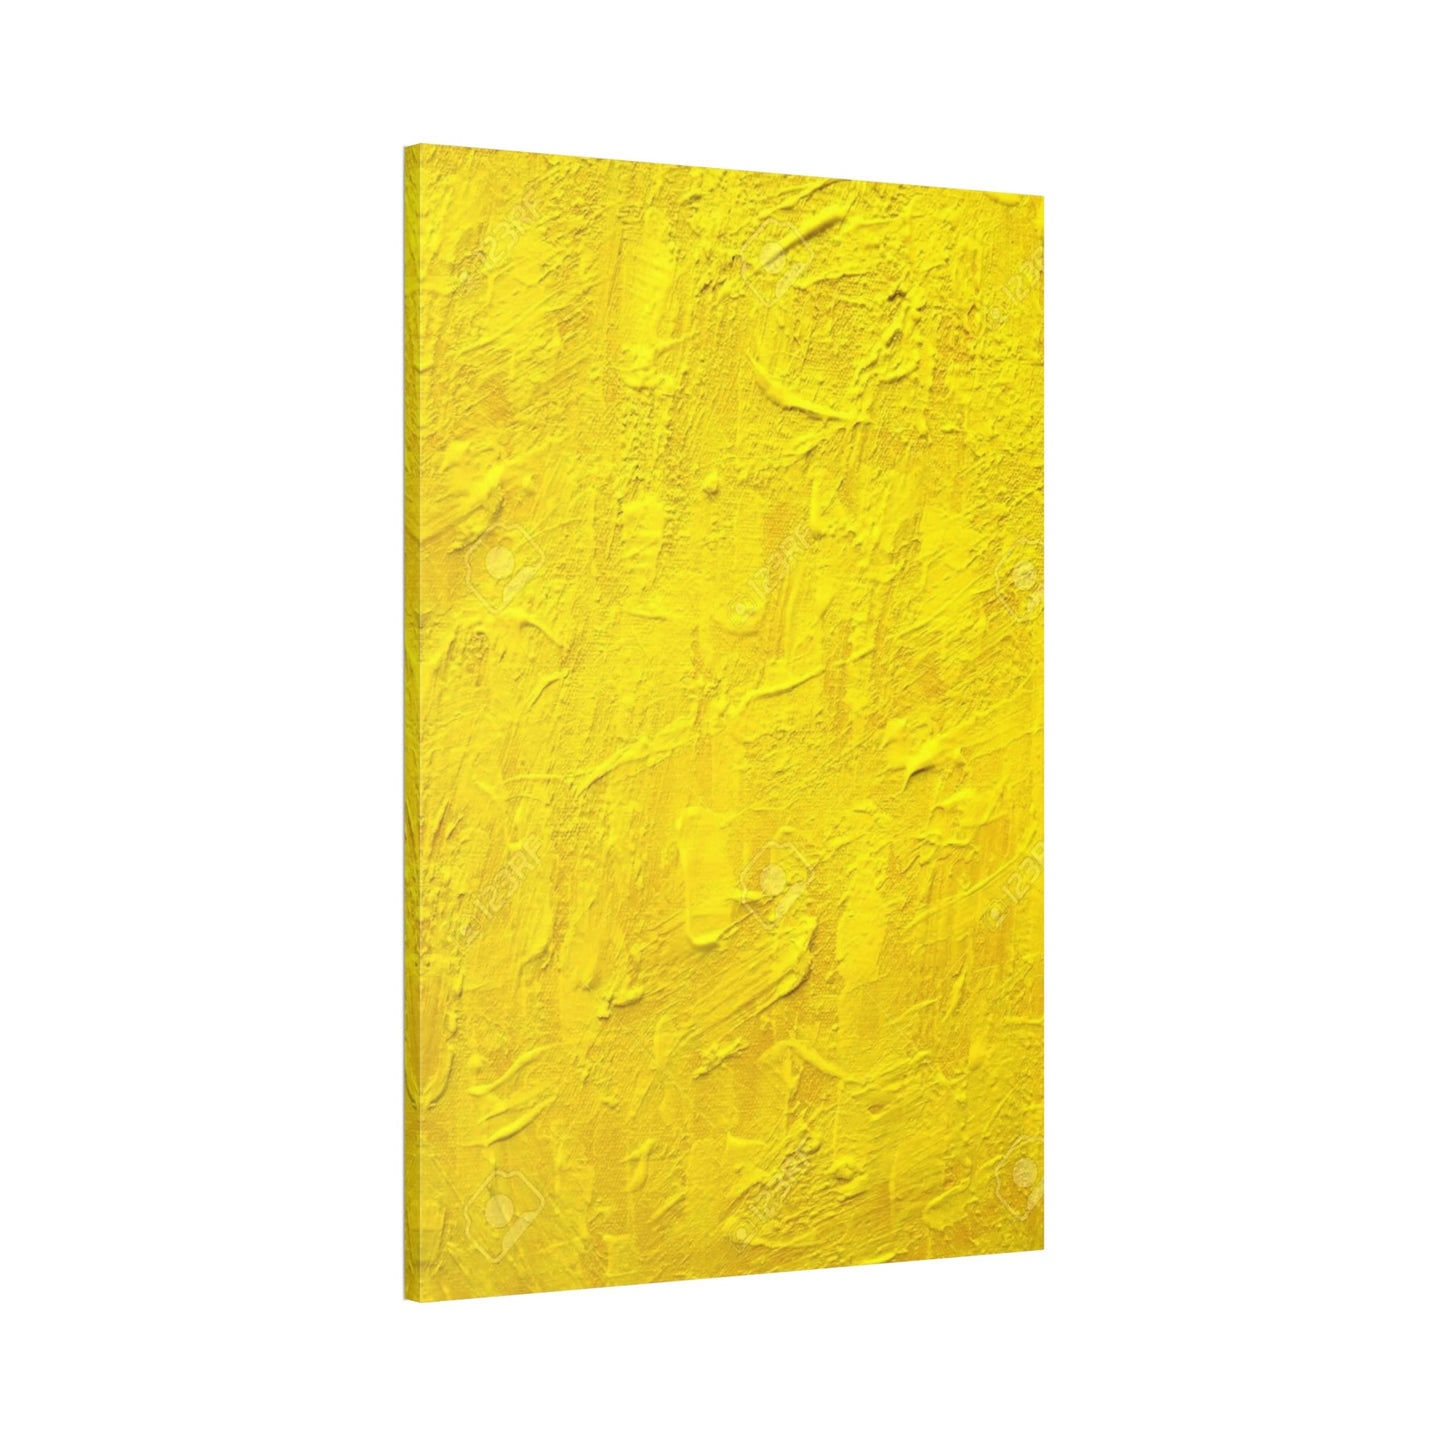 Relaxing and Serene Wall Art Print of a Yellow Color on Natural Canvas